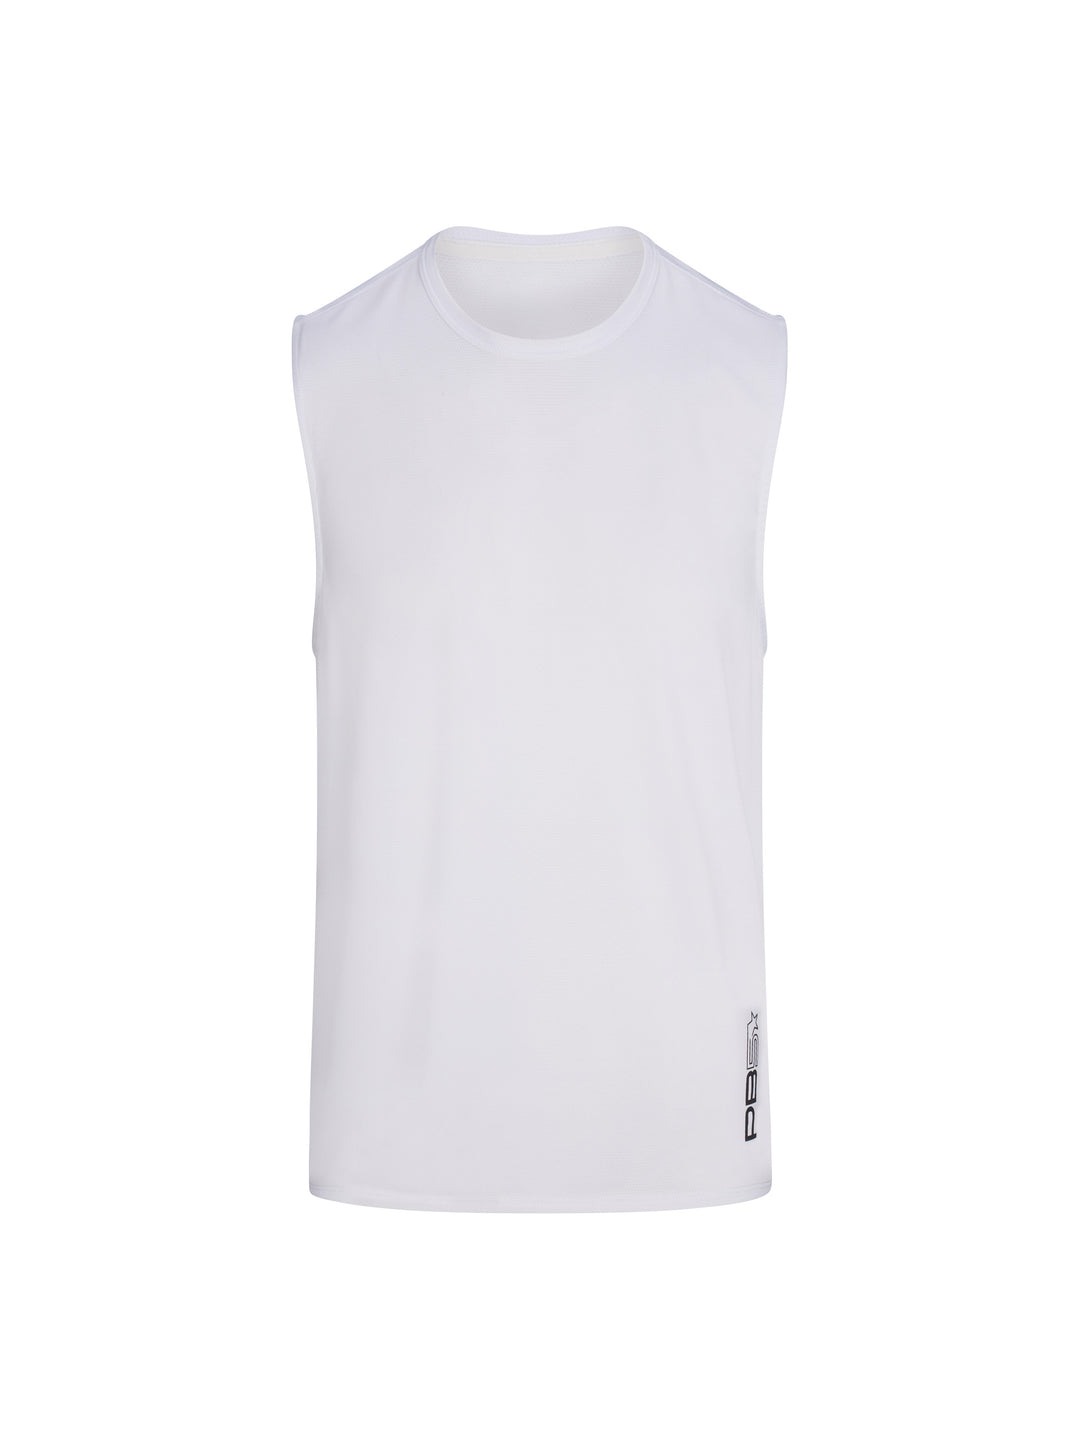 Men's Vented Sleeveless Tee front view in white. Logo on lower left side seam.